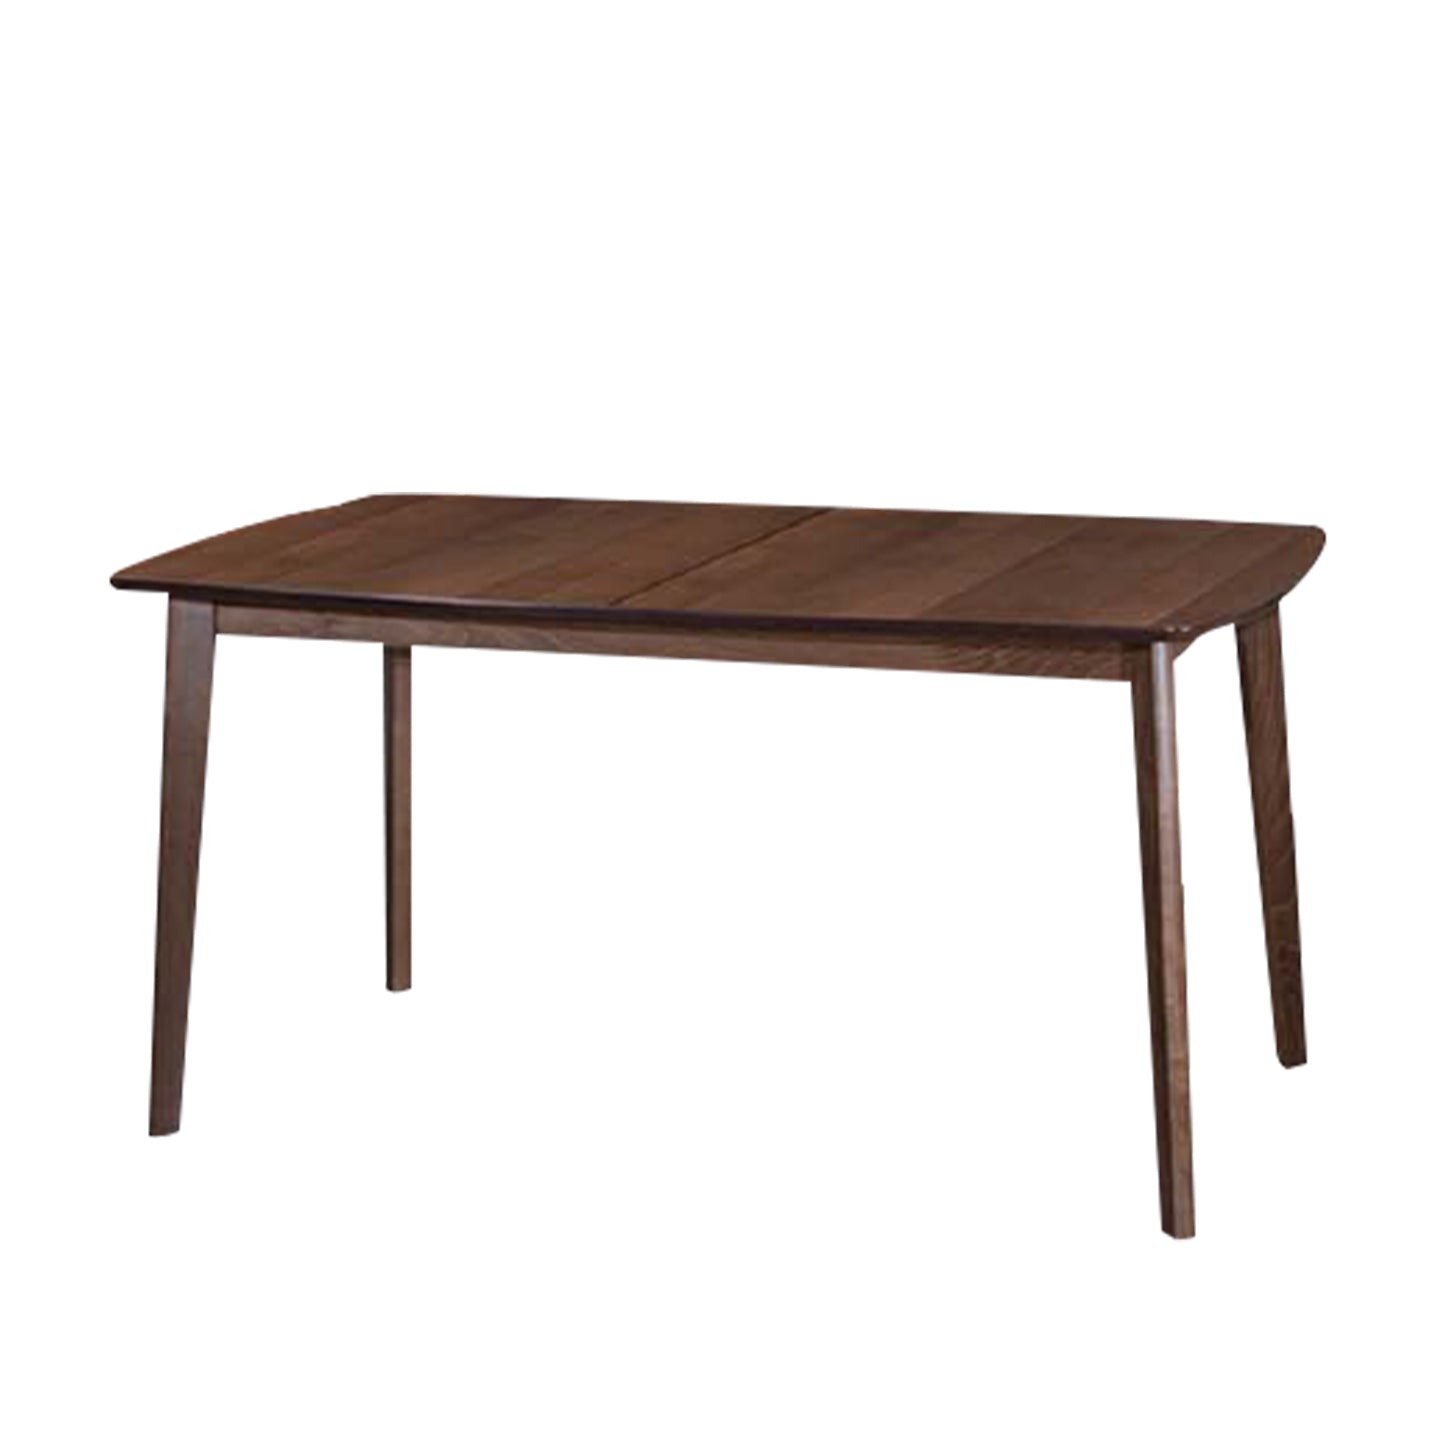 Pefka Extendable Dining Table